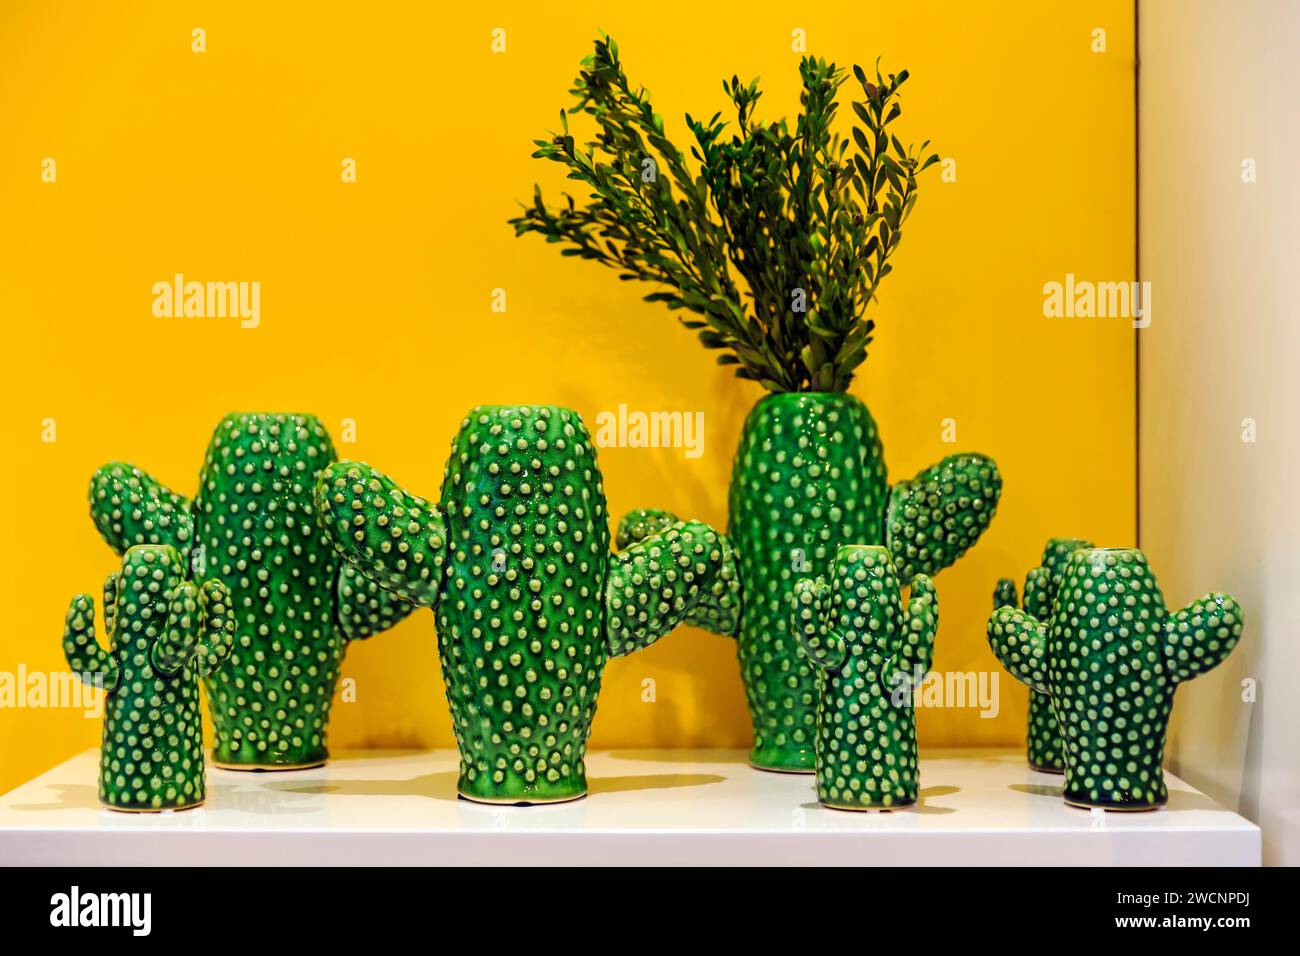 Green cactus vases in a yellow display case, vases in the shape of cacti, souvenir shop in the Museum Fundacio Joan Miro, Joan Miro, CEAC, Montjuic Stock Photo